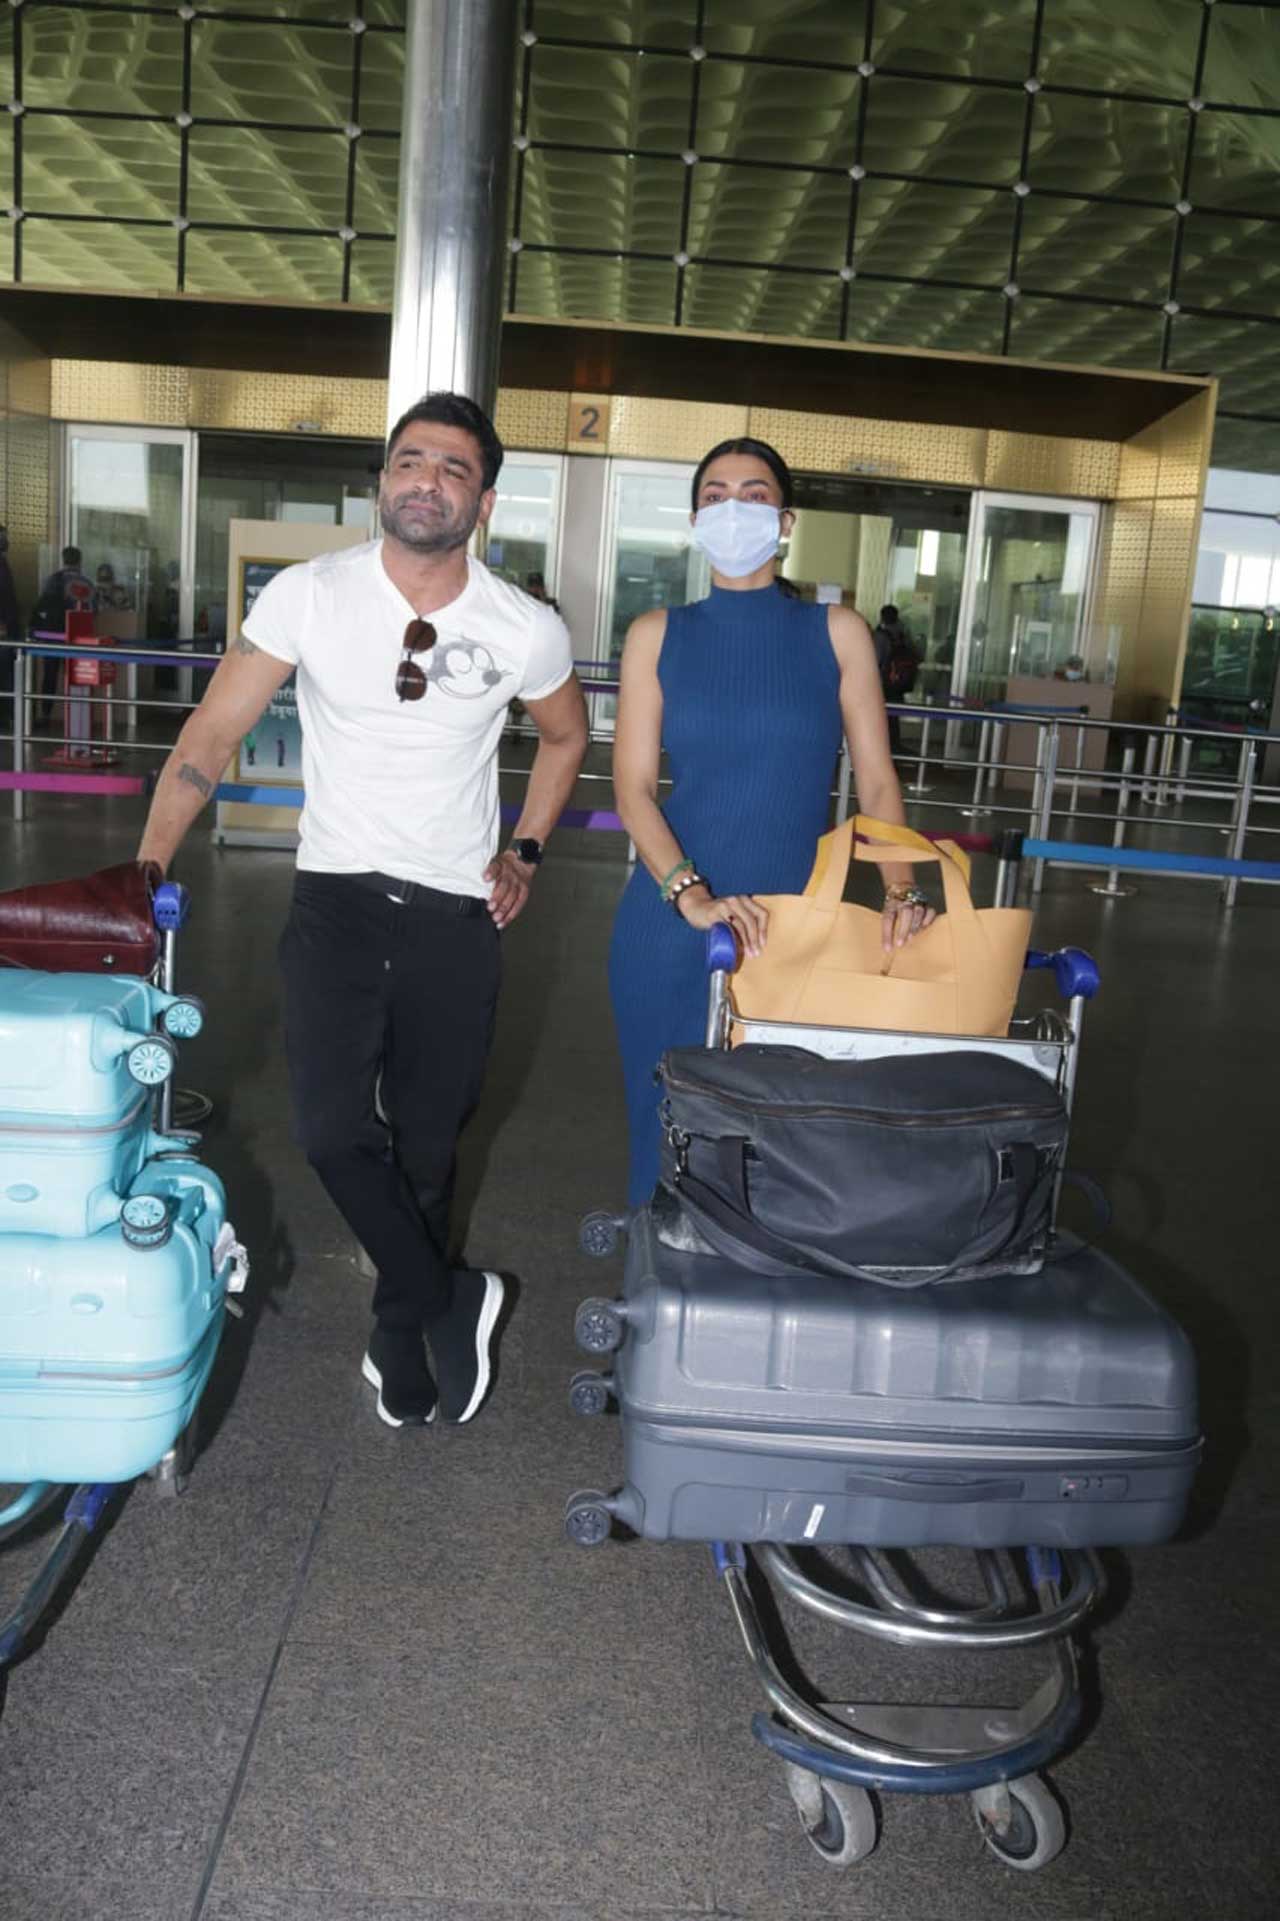 Today the lovebirds were spotted at the airport and as usual, their chemistry grabbed everyone's attention. Eijaz Khan kept his airport look basic with a white tee and black pants. Pavitra chose a comfy yet stylish blue dress for the journey.